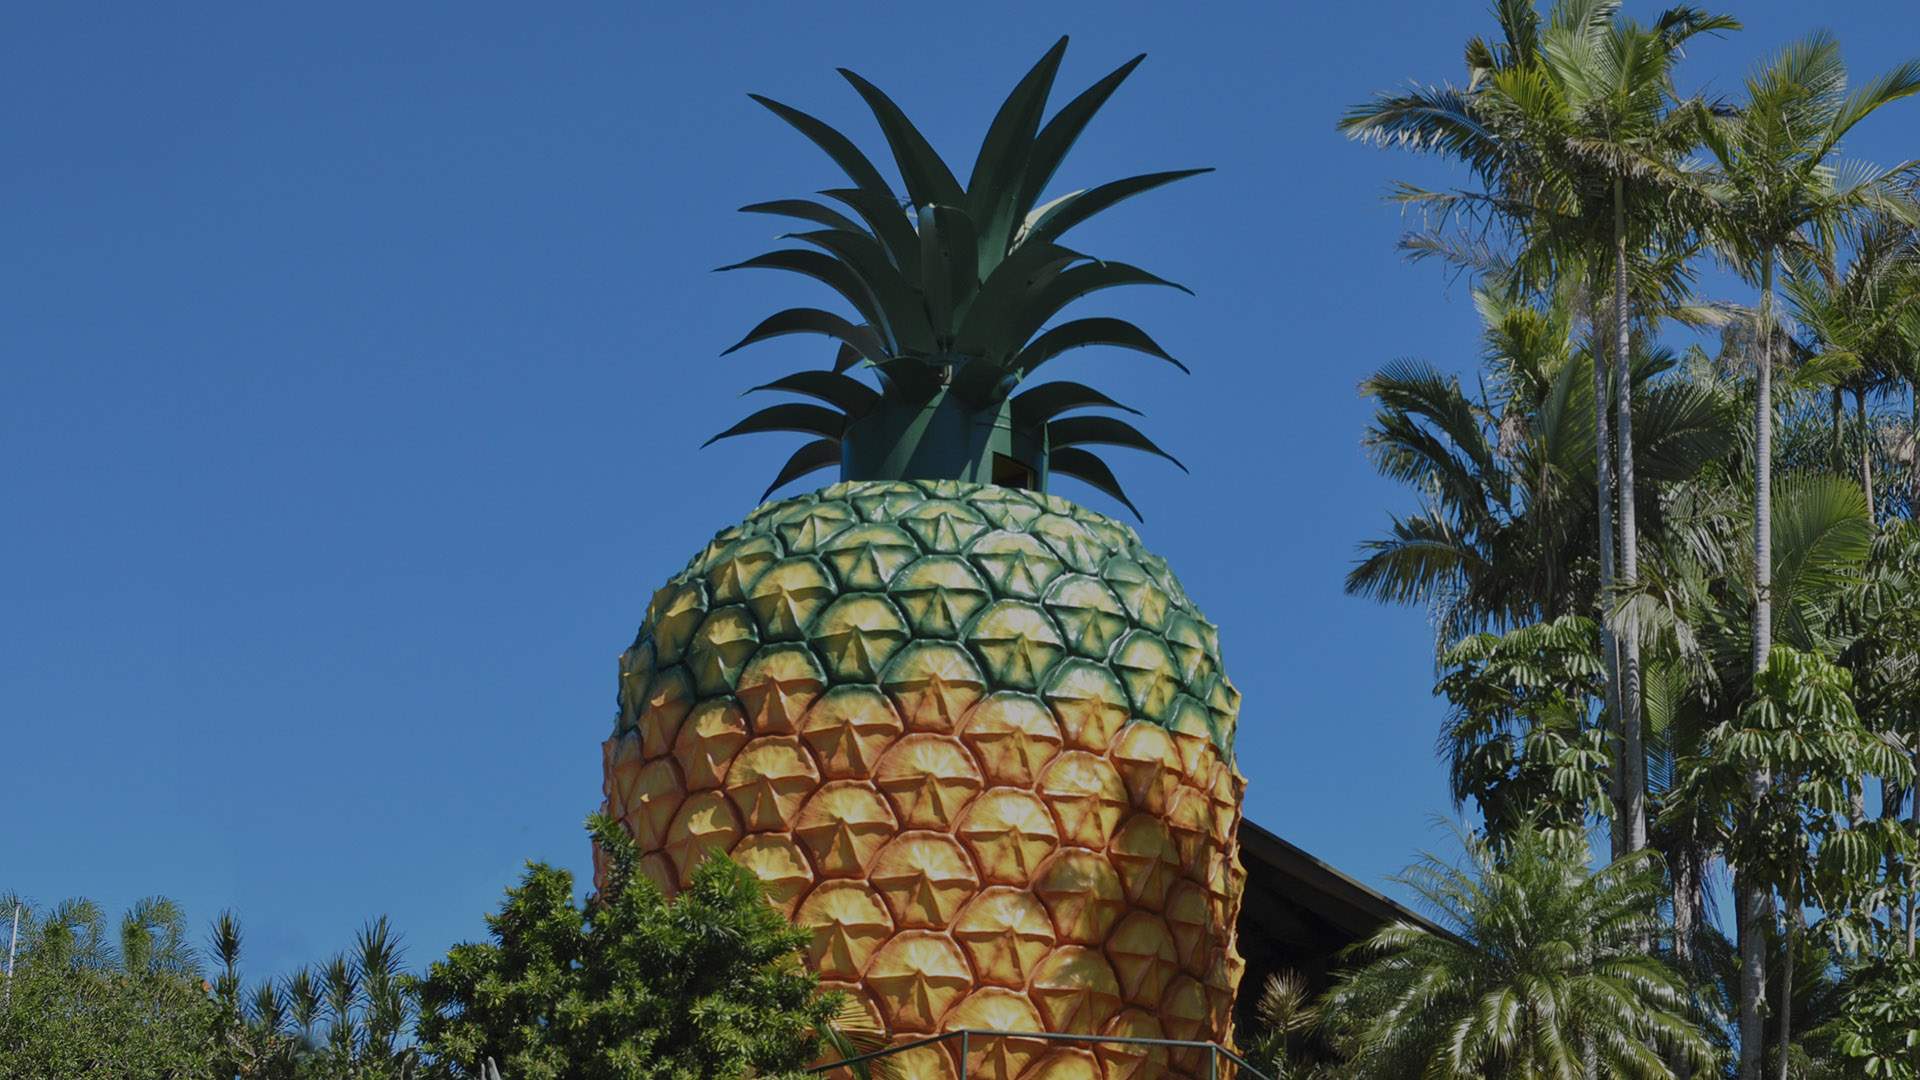 The Big Pineapple Is Set to Score a Zipline, Water Park and Craft Brewery as Part of a $150 Million Revamp